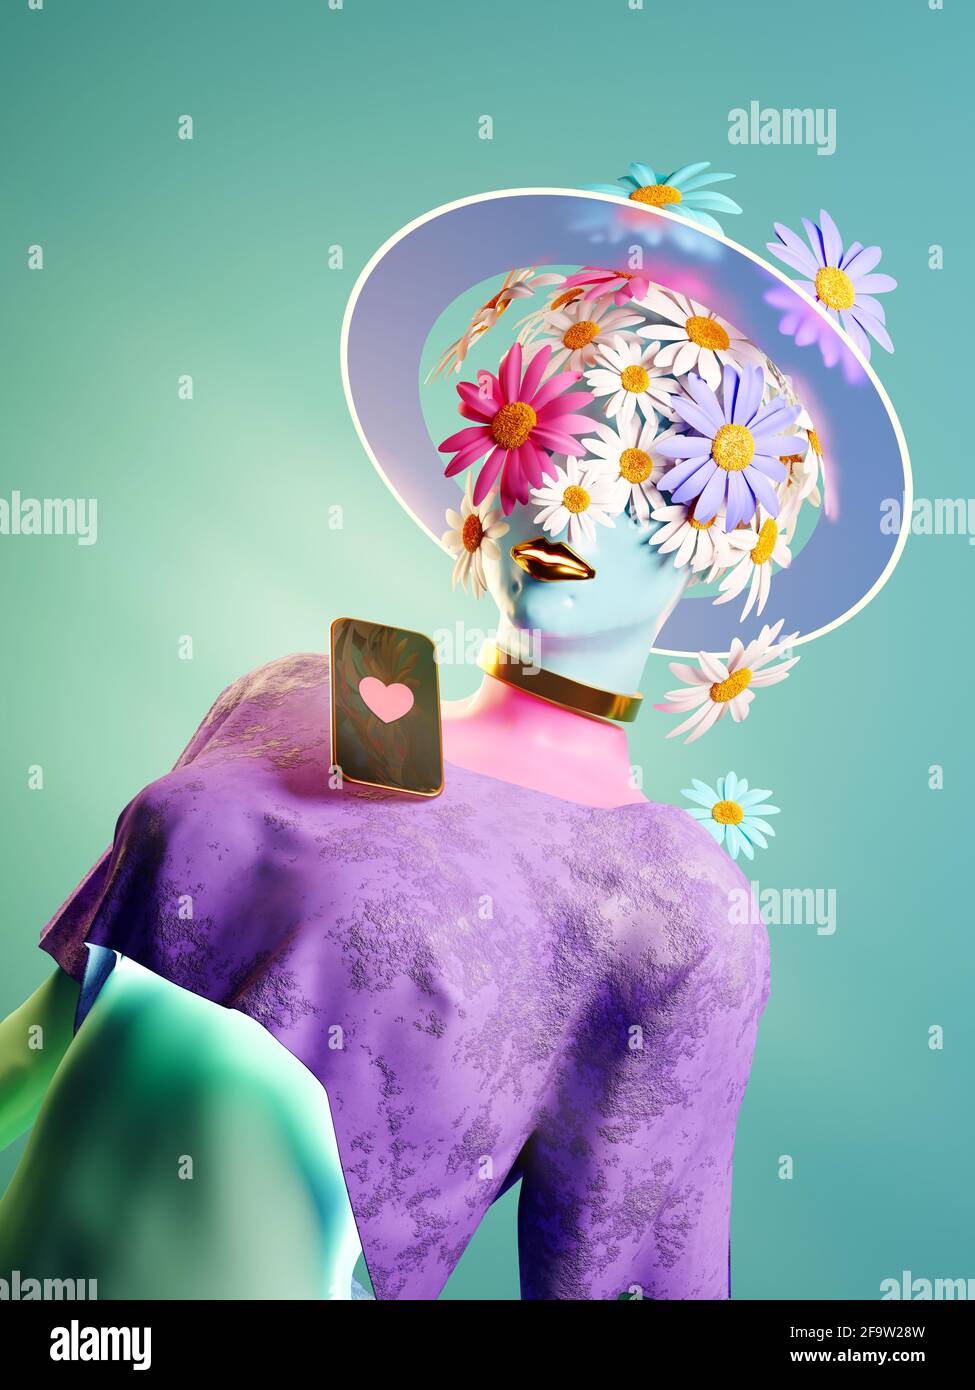 Surreal abstract women portrait with flowers over her face and head. People 3D illustration Stock Photo